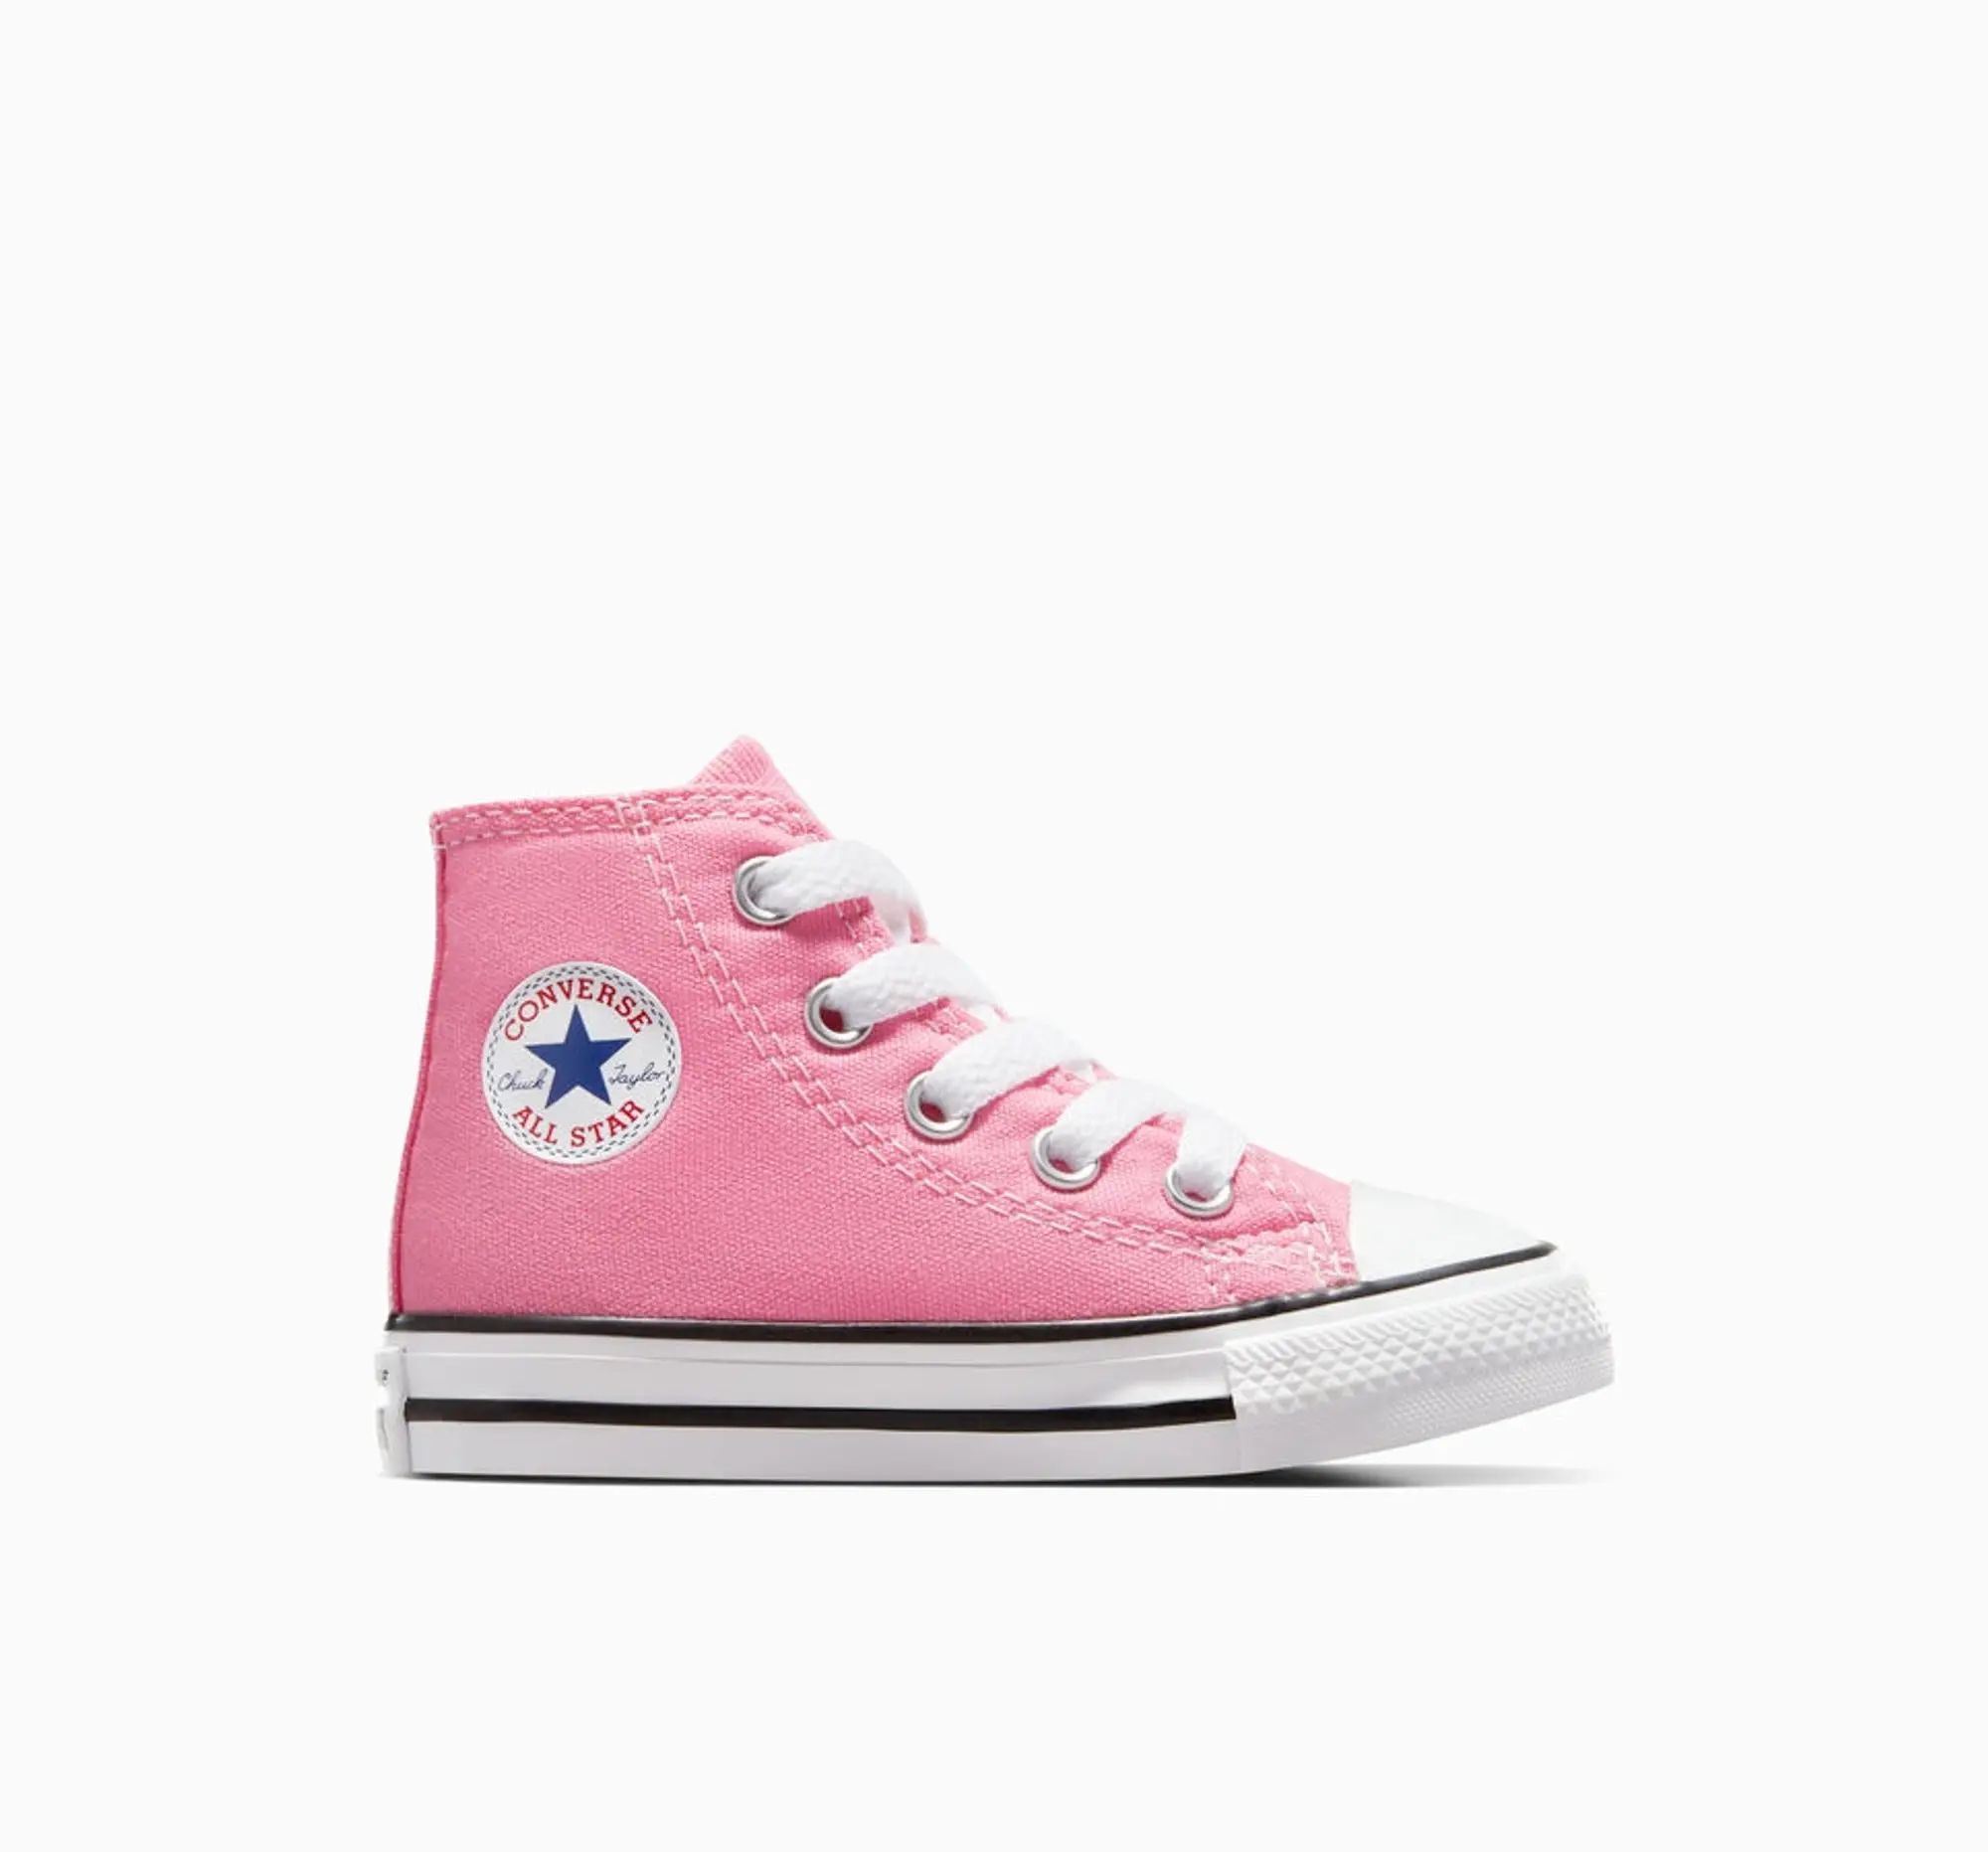 Converse Chuck Taylor All Star Ox Infant Girls Trainers -Pink, Pink